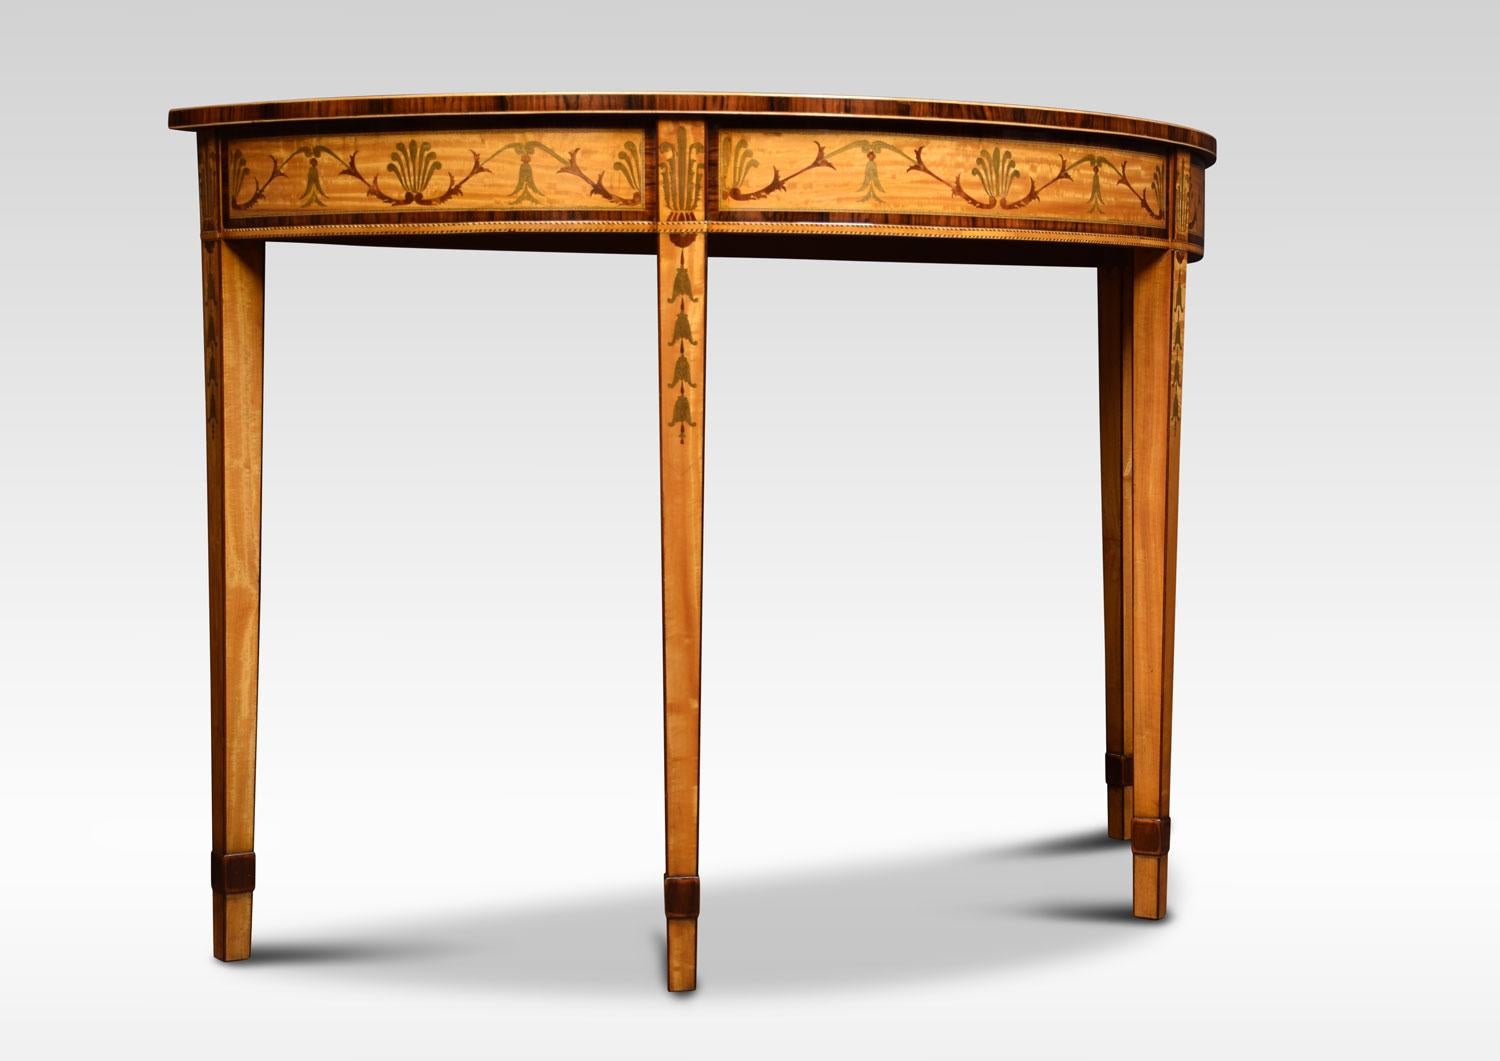 Pair of Satinwood Inlaid Neoclassical Style Demilune Console Tables (20. Jahrhundert)